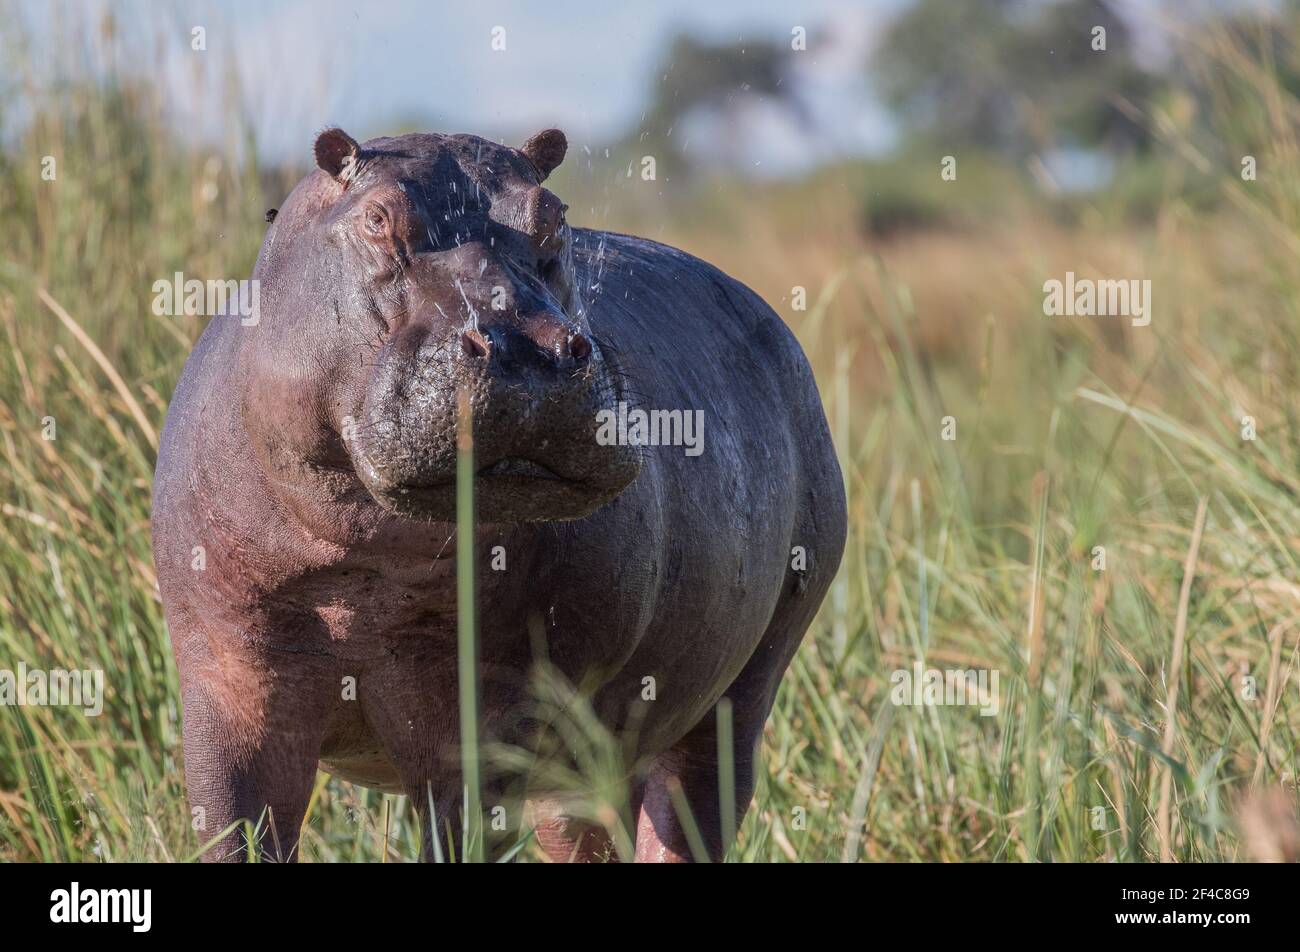 A hippo flaring his nostrils as the boat floats by - Okavango Delta, Botswana. Stock Photo